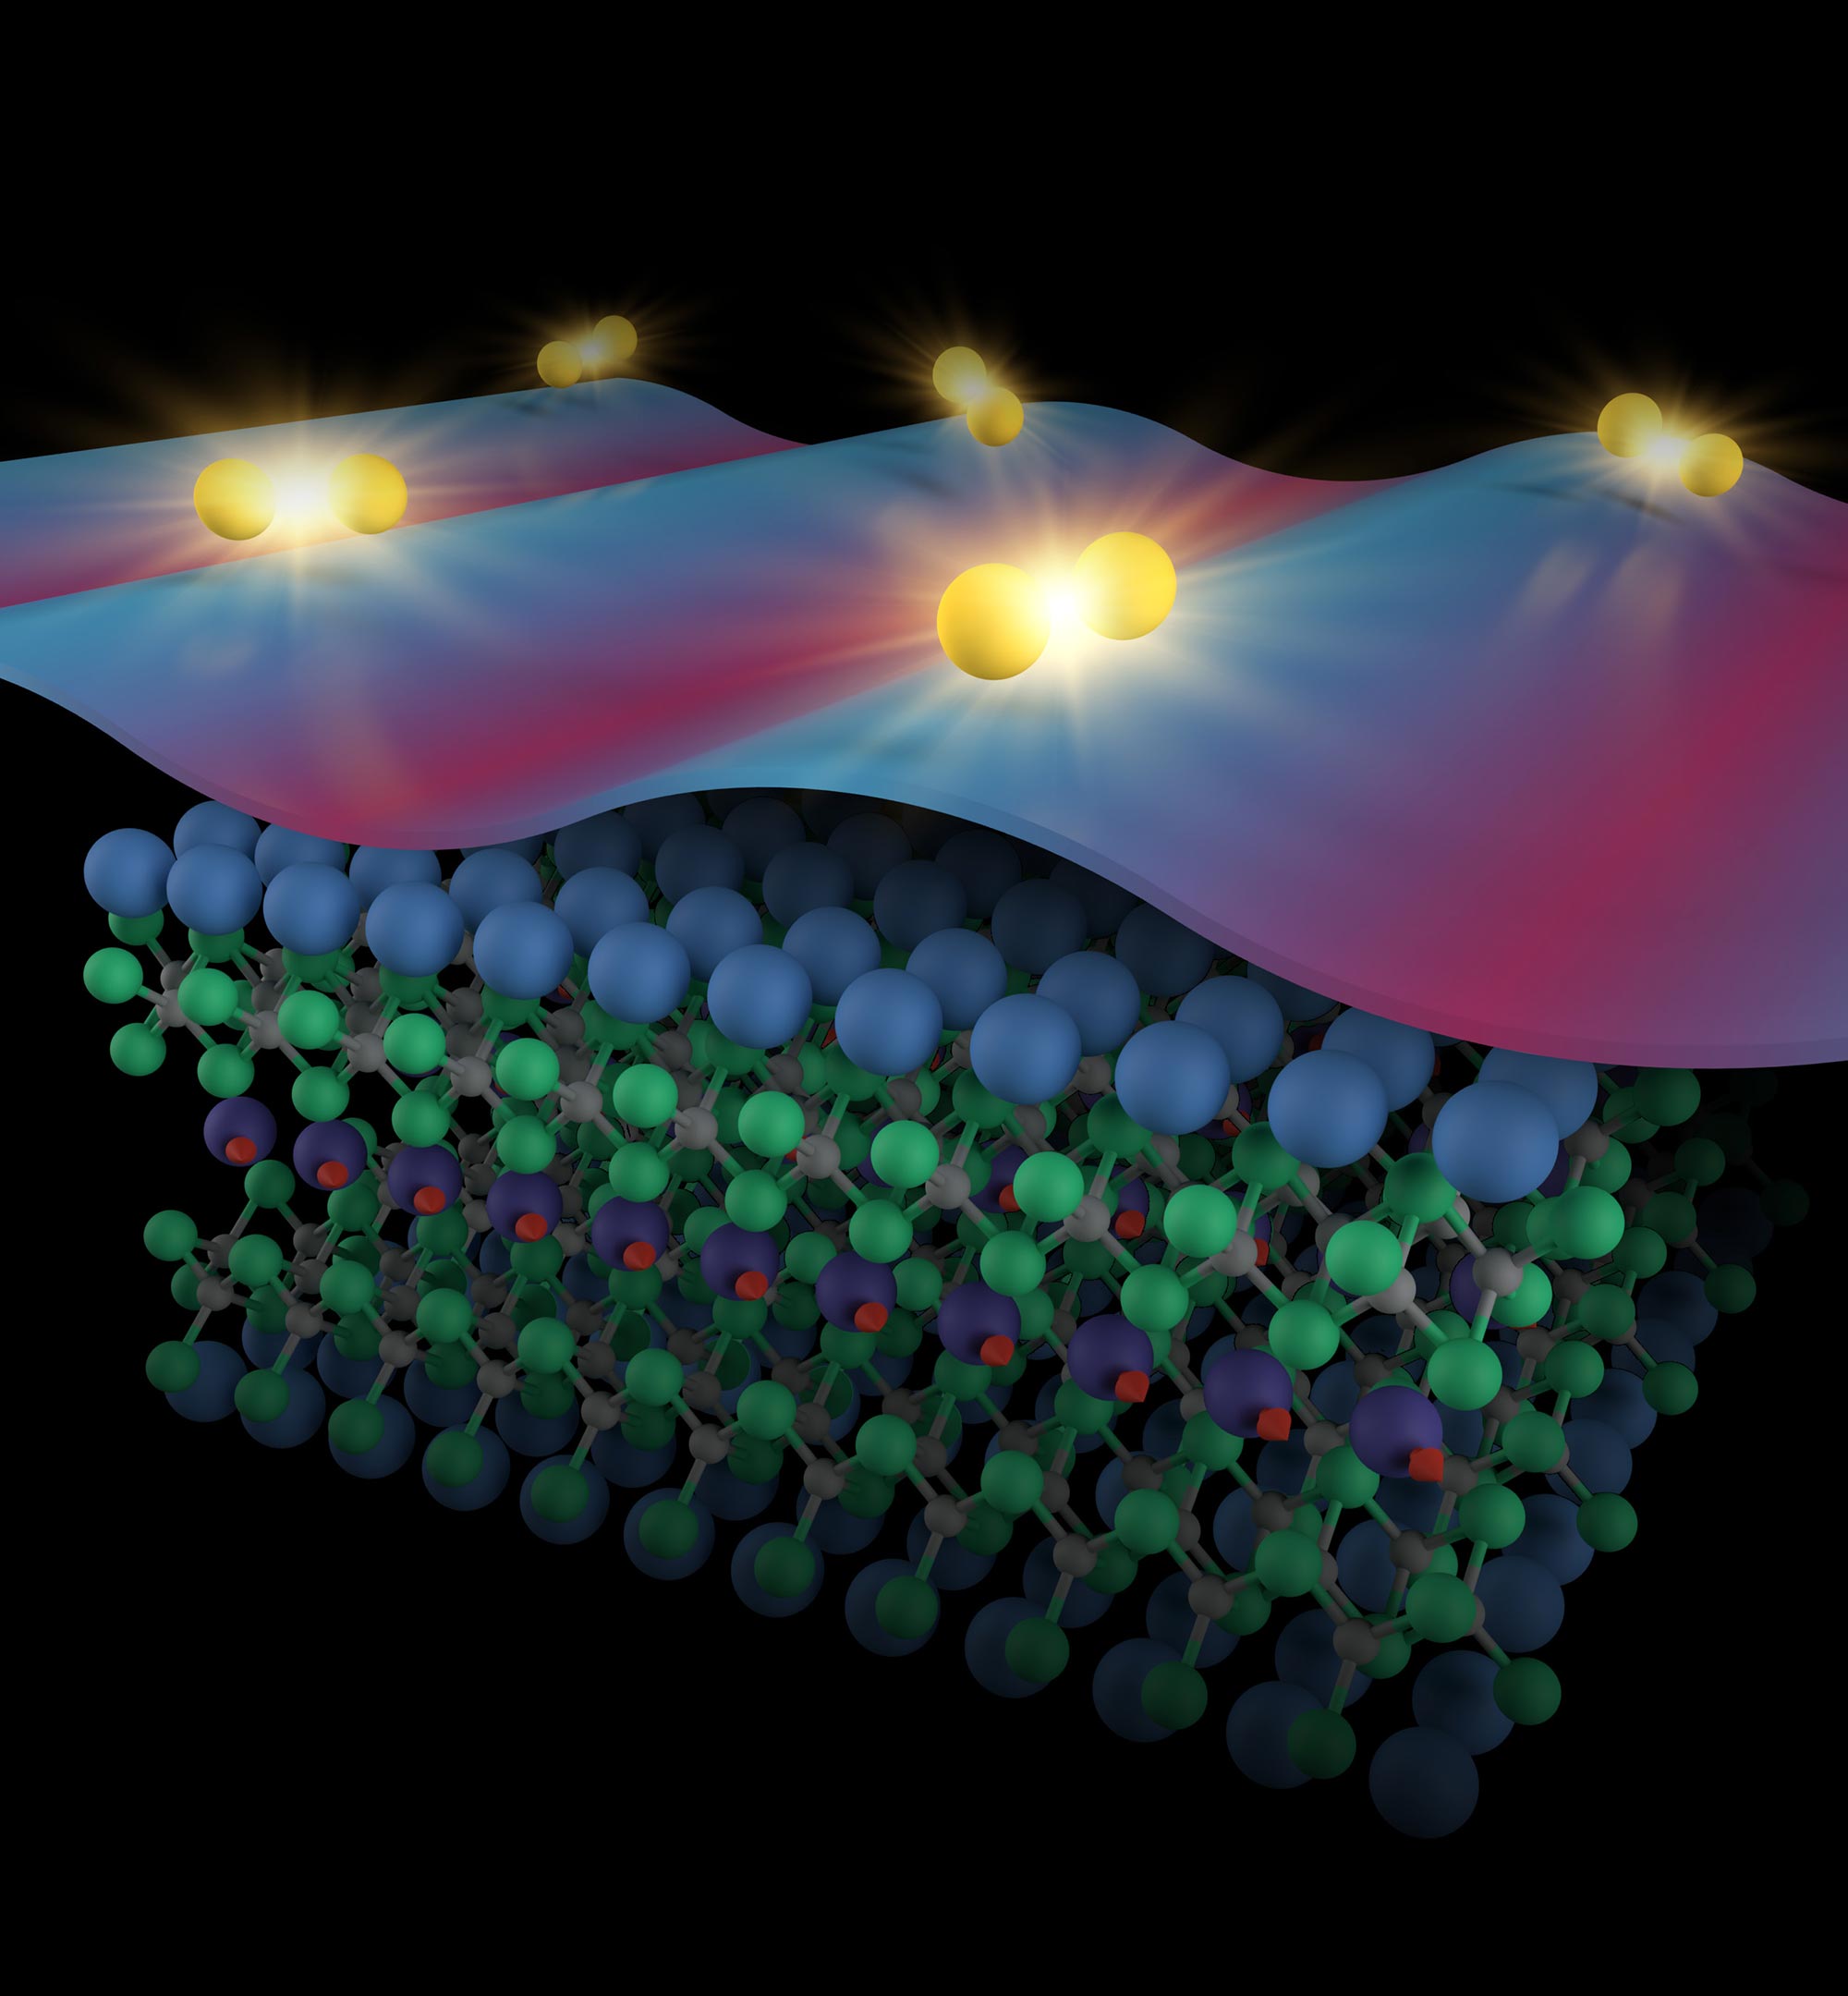 Image: In this illustration of the superconducting material Eu-1144, the blue and magenta wave shown above the crystal lattice represents how the energy level of the electron pairs (yellow spheres) spatially modulates as these electrons move through the crystal. Credit: Brookhaven National Laboratory